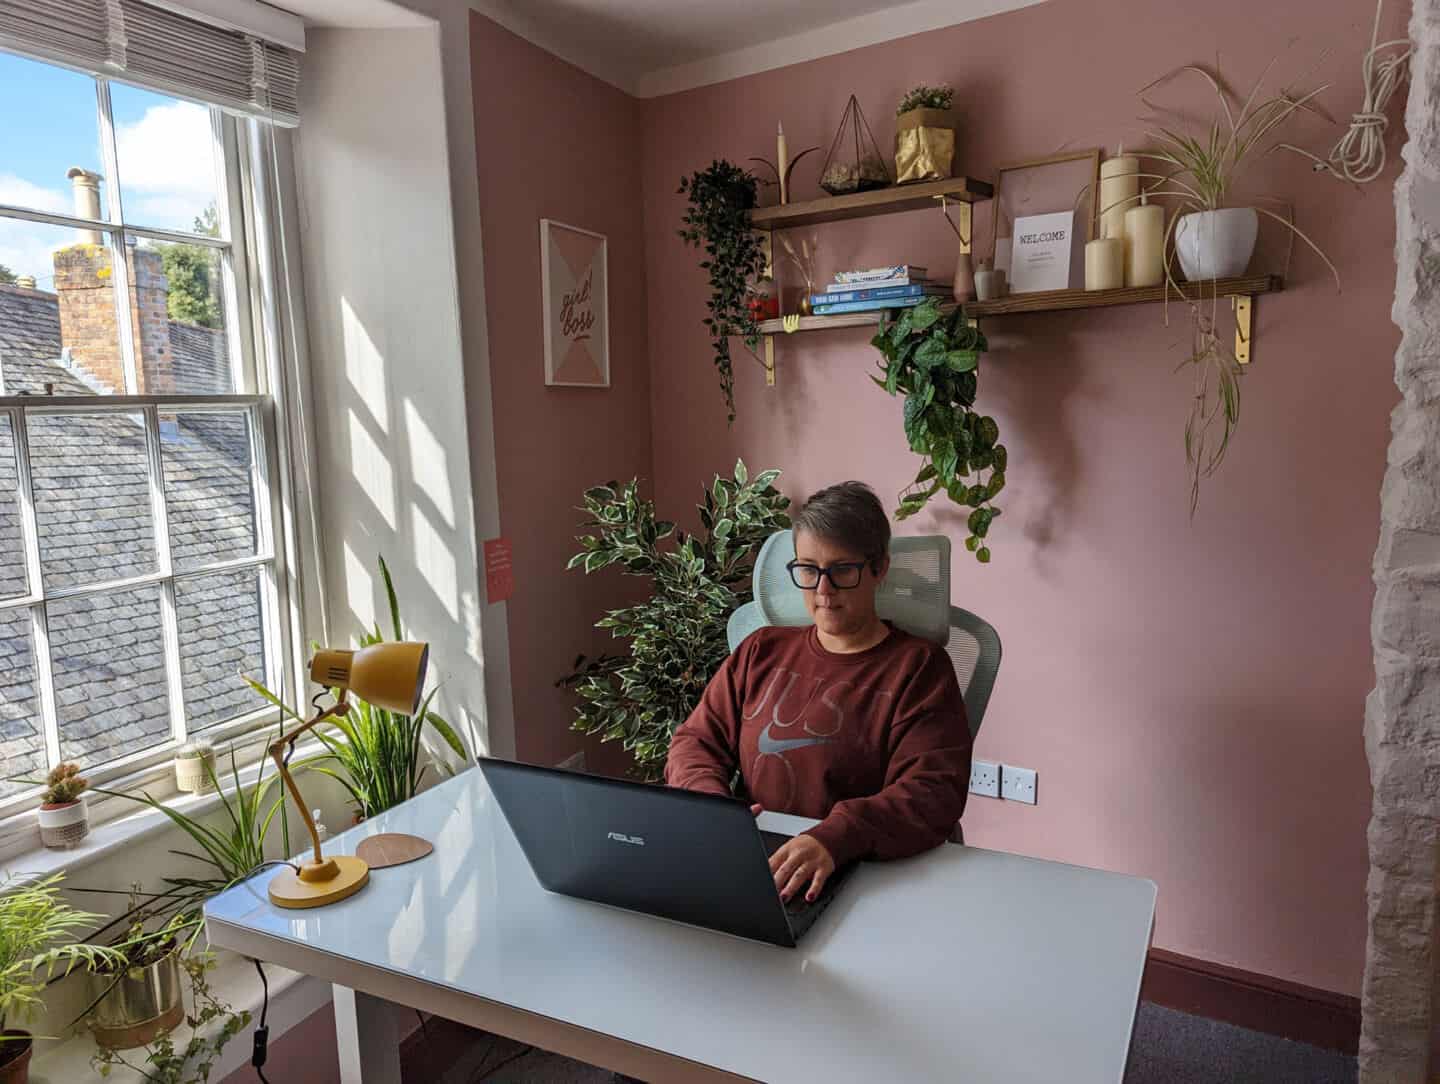 A woman sat at a desk working on a laptop in a pink office.